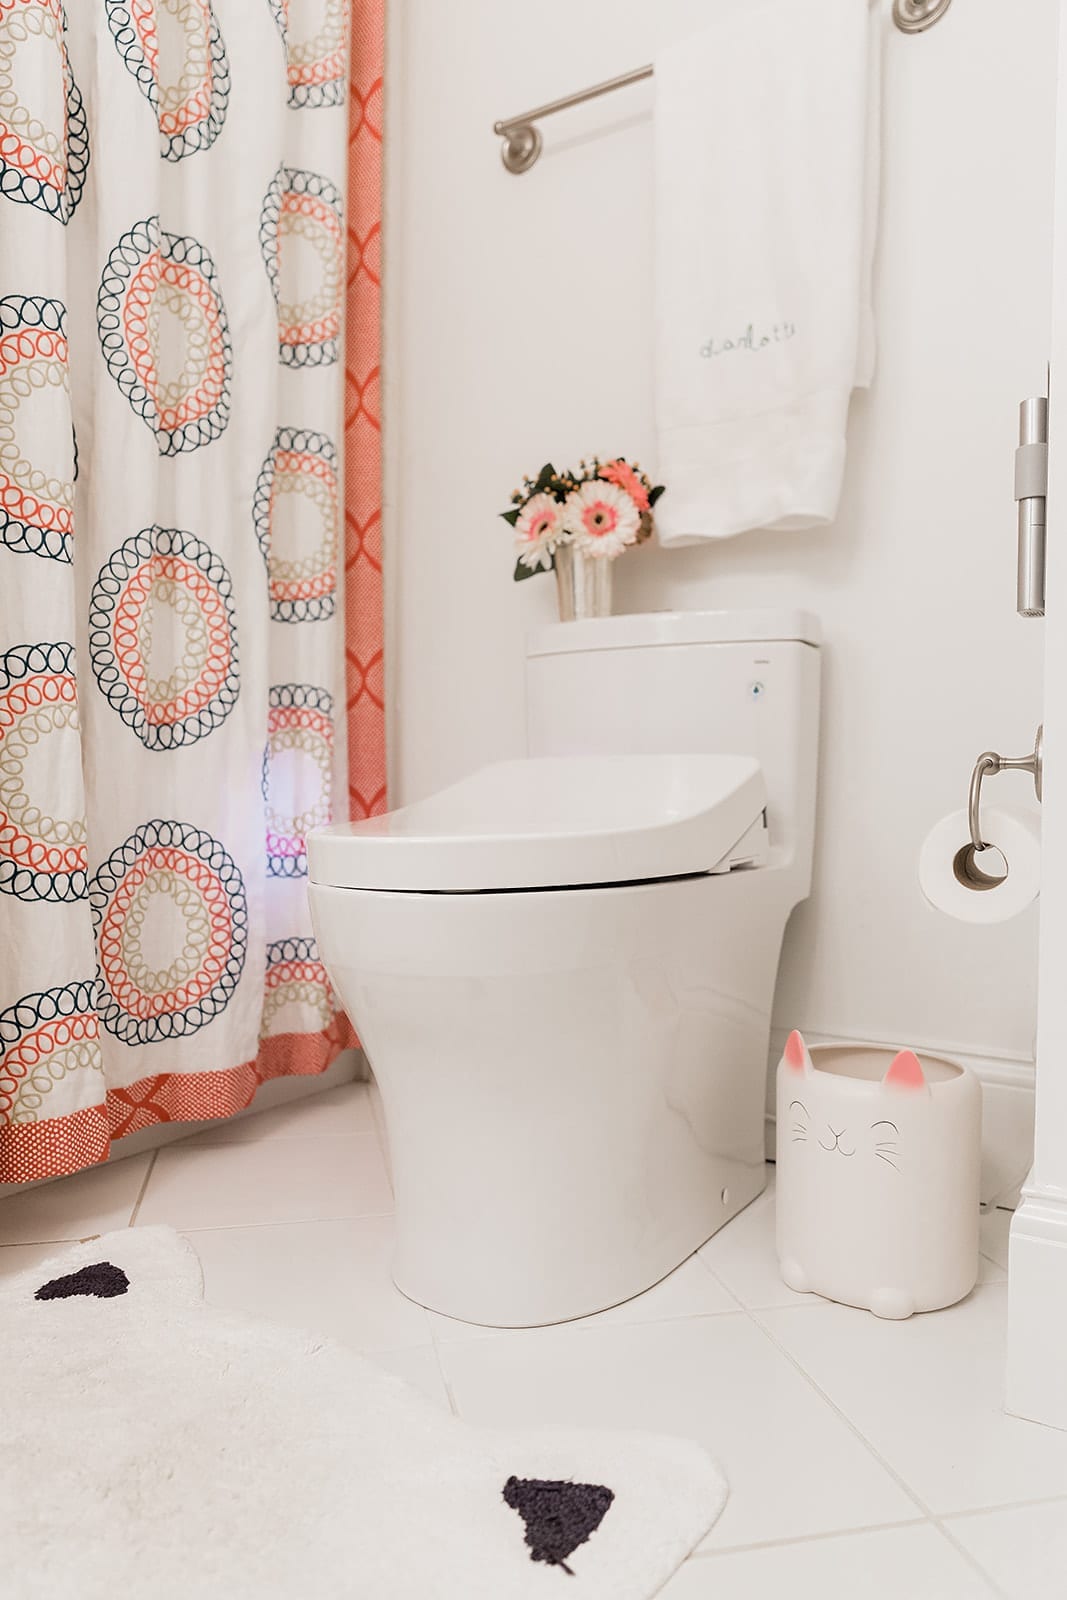 Be “TOTO-ly” clean! We put in a TOTO Aquia IV WASHLET+ S550e in both our powder bathroom, and our daughter’s bathroom. Why? Because life w/ 3 busy kids make these bathroom areas, ahem, well-loved! Kids can rush through hand washing. This WASHLET+ model provides auto-open/close lid and auto-flush! No hands touching anything! Plus, I feel better knowing my little people get properly clean thanks to the bidet “services” of WASHLET 😉 Head to my website for all the details so you can get “TOTO-ly” clean, too! TOTO WASHLET is in our kids bathroom.